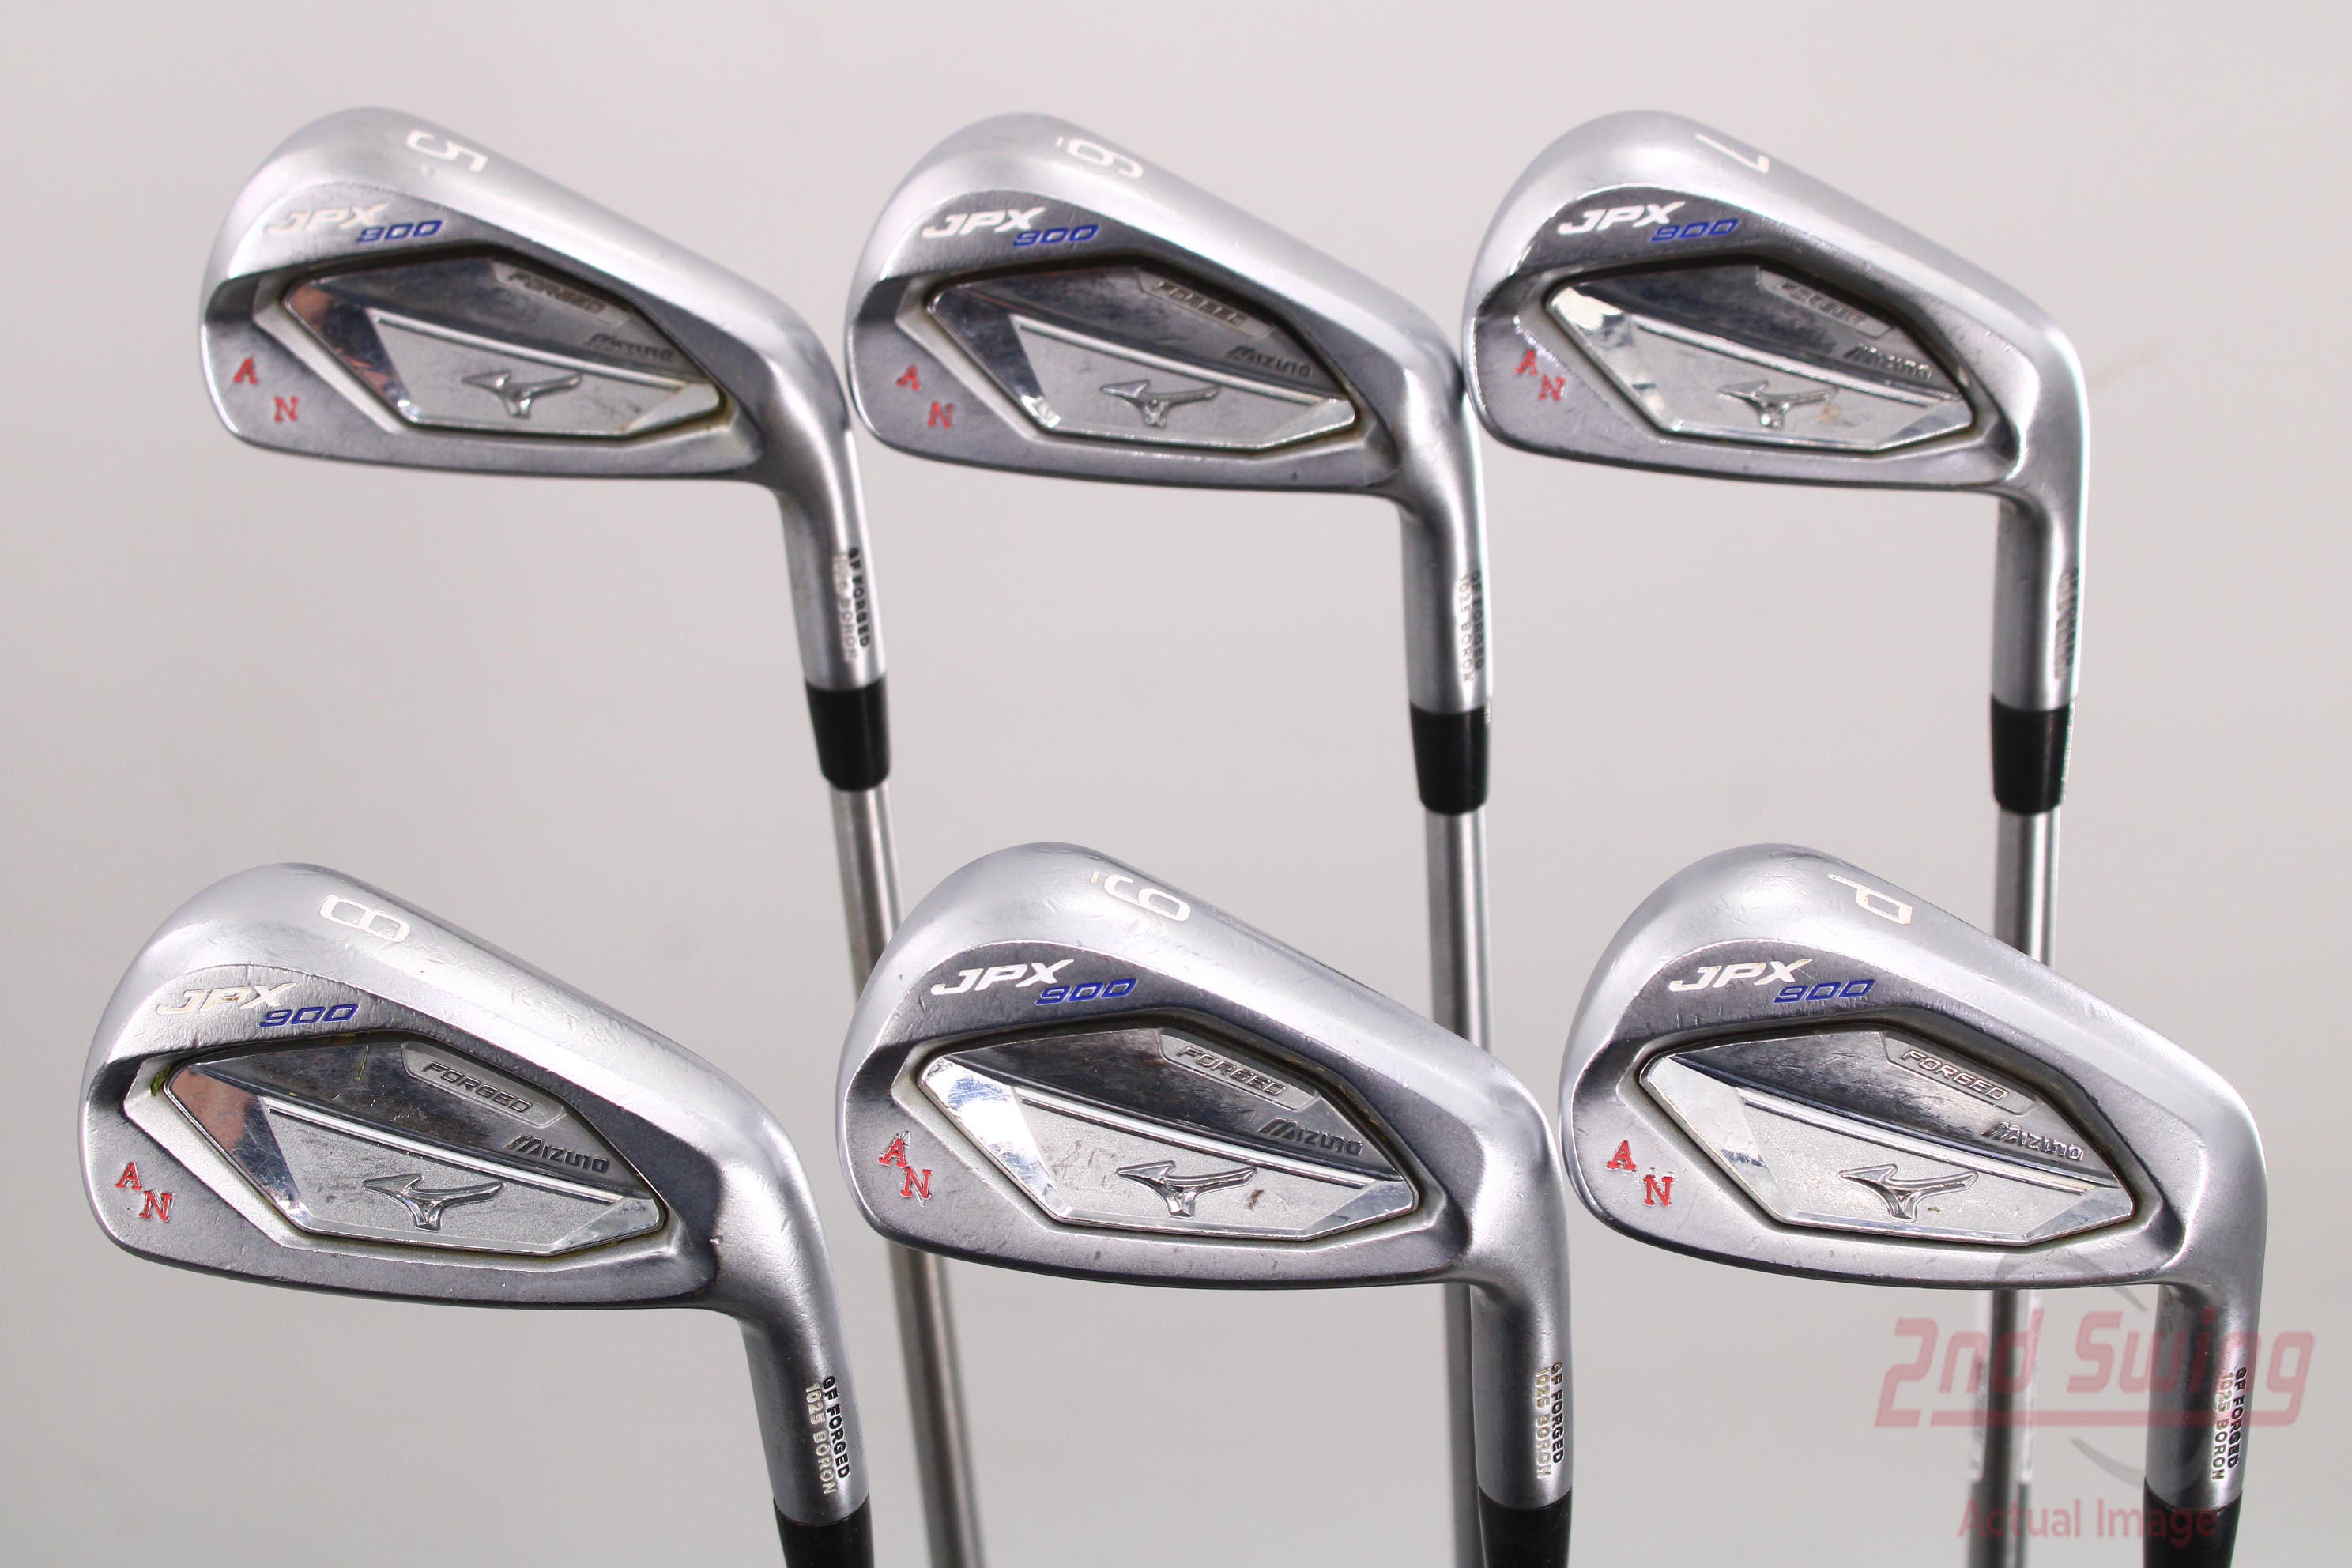 Bungalow Pijlpunt Wens Mizuno JPX 900 Forged Iron Set (A-72332231850) | 2nd Swing Golf